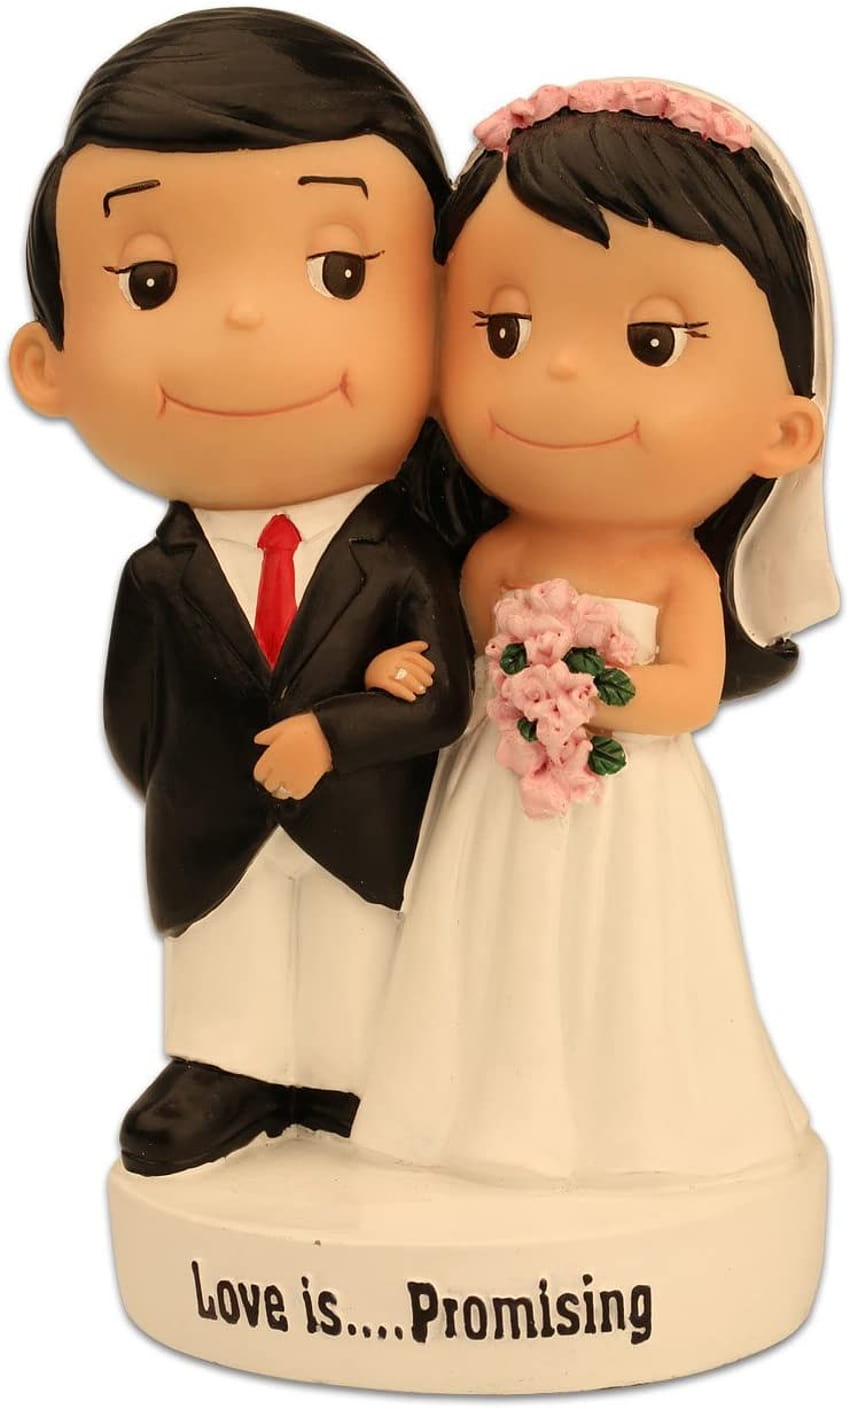 MING PEOPLE Wedding Cartoon Bride and Groom Figurine for Cake Topper Decorations : Toys & Games HD phone wallpaper